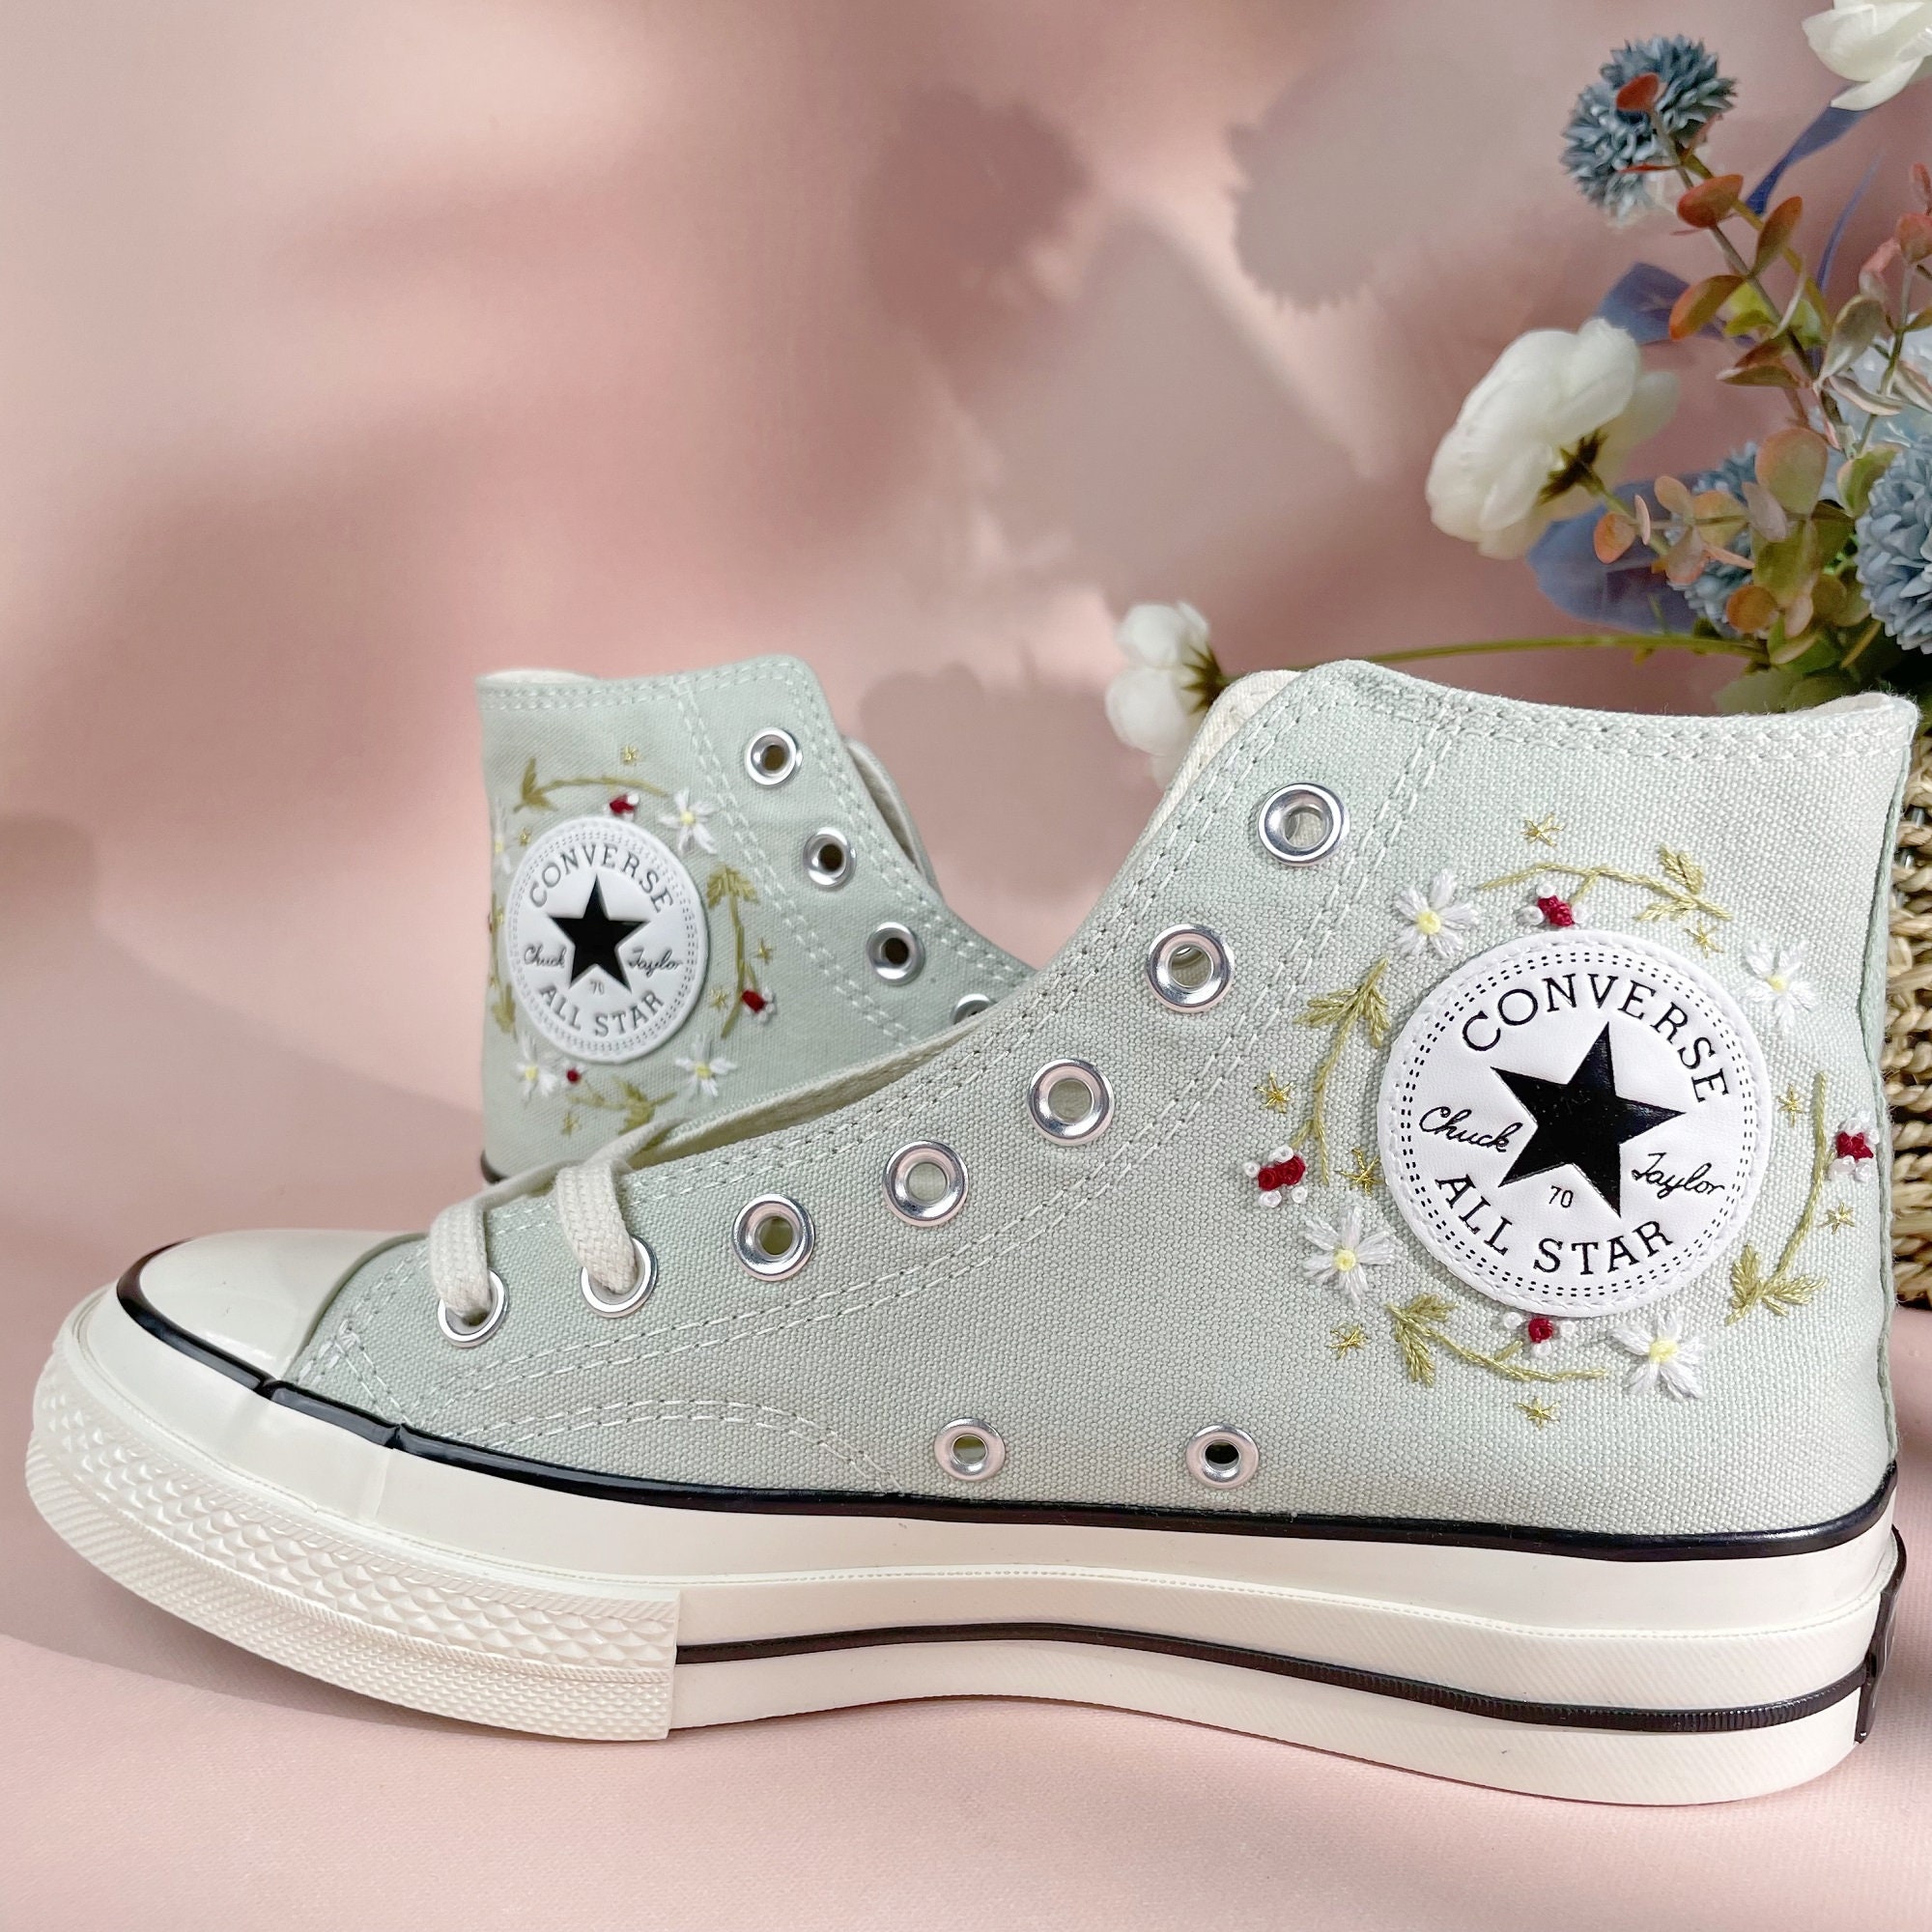 Converse Chuck Taylor All Star Heart Embroidery Sneakers in White